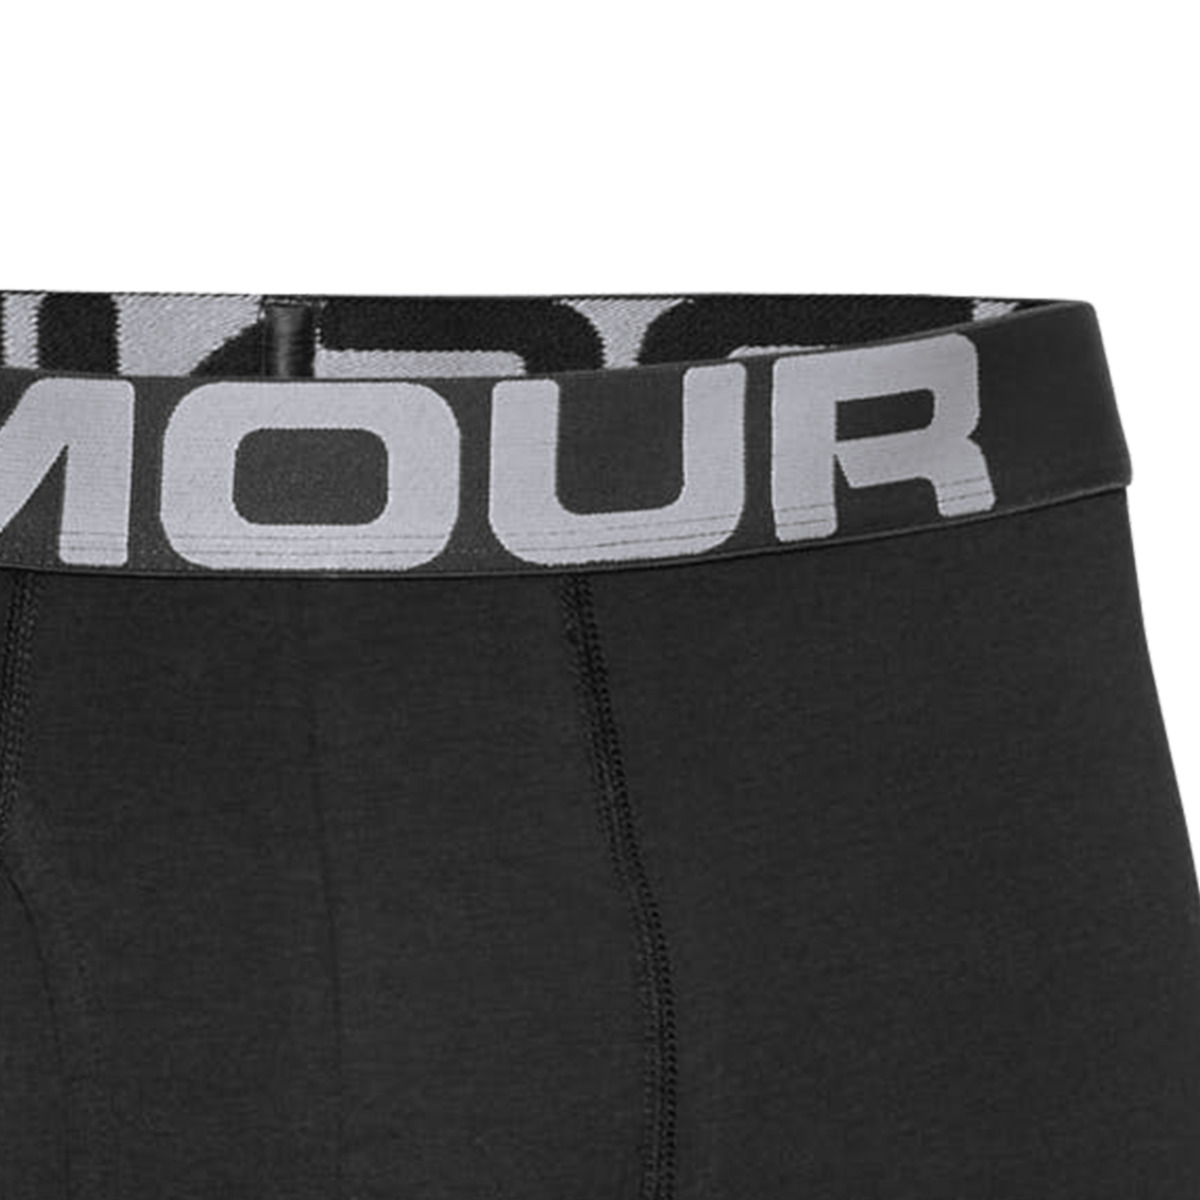 Under Armour Charged Cotton 6in 3 Pack Boxershorts schwarz